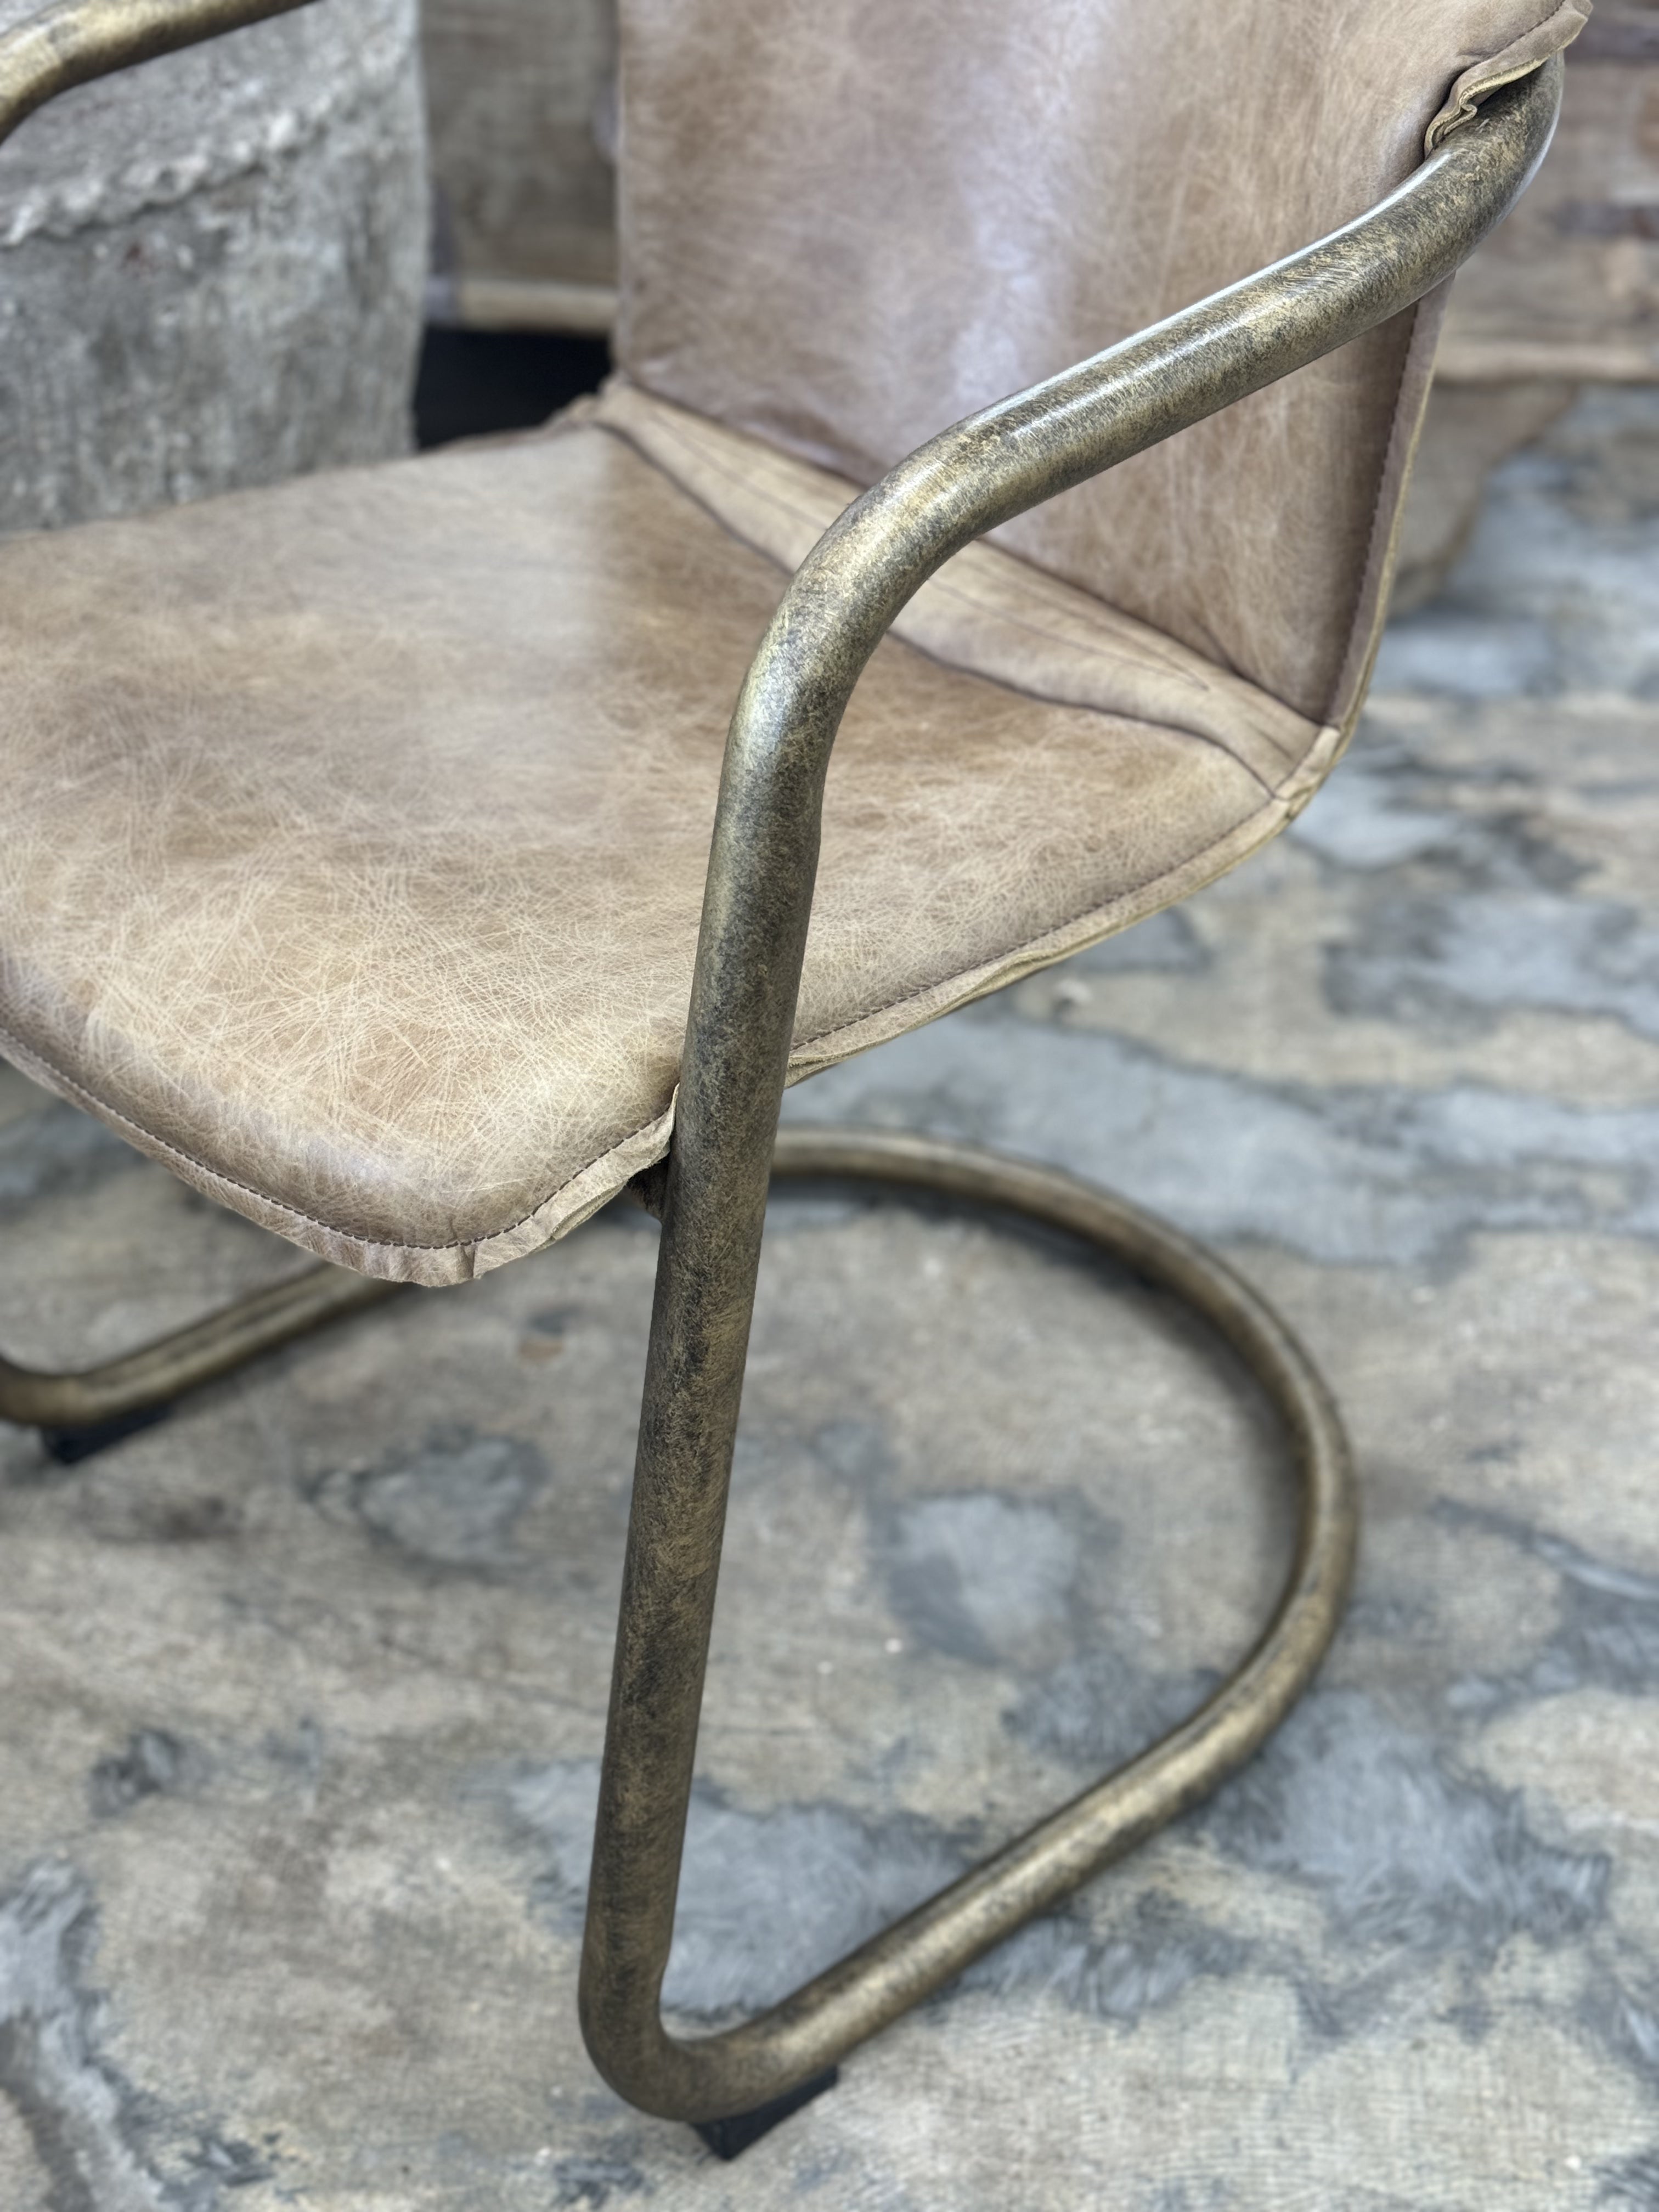 Leather & Brass Dining Chair | Creeping Fig